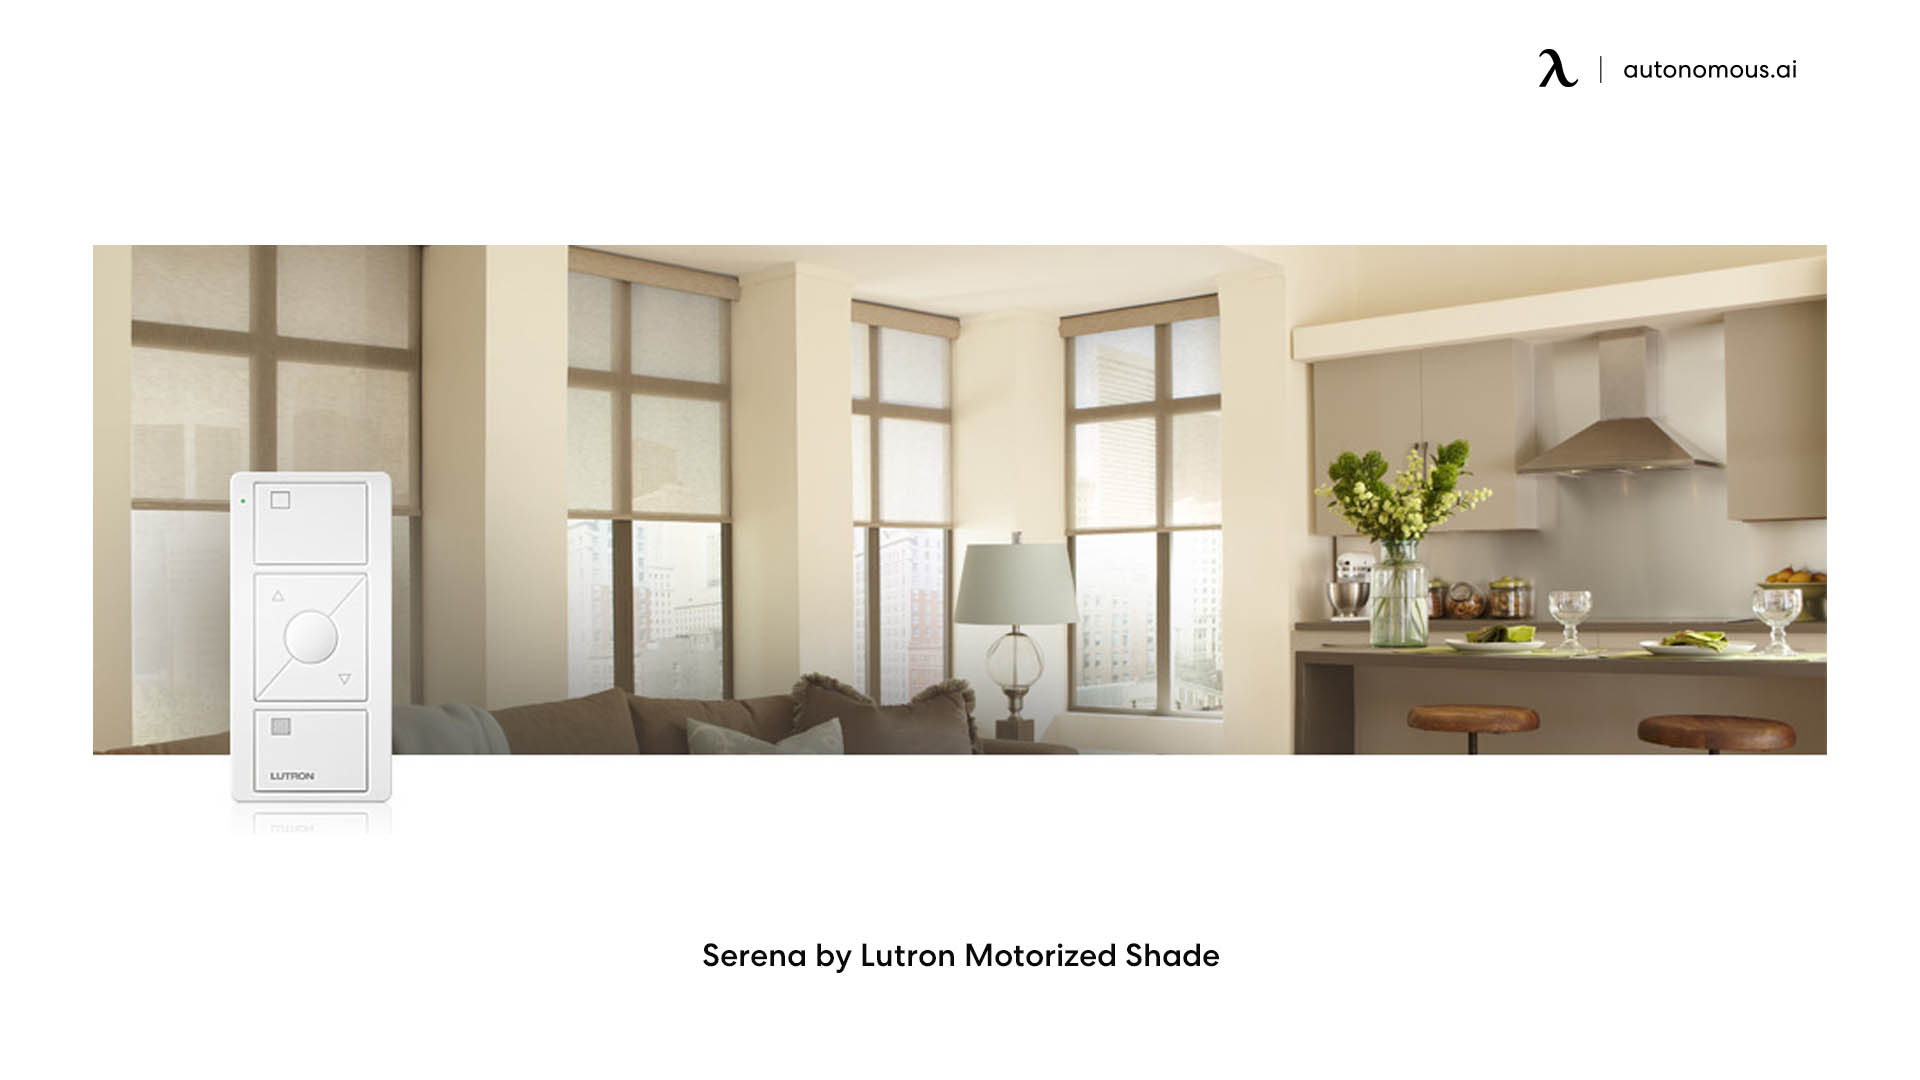 Serena by Lutron Motorized Shade